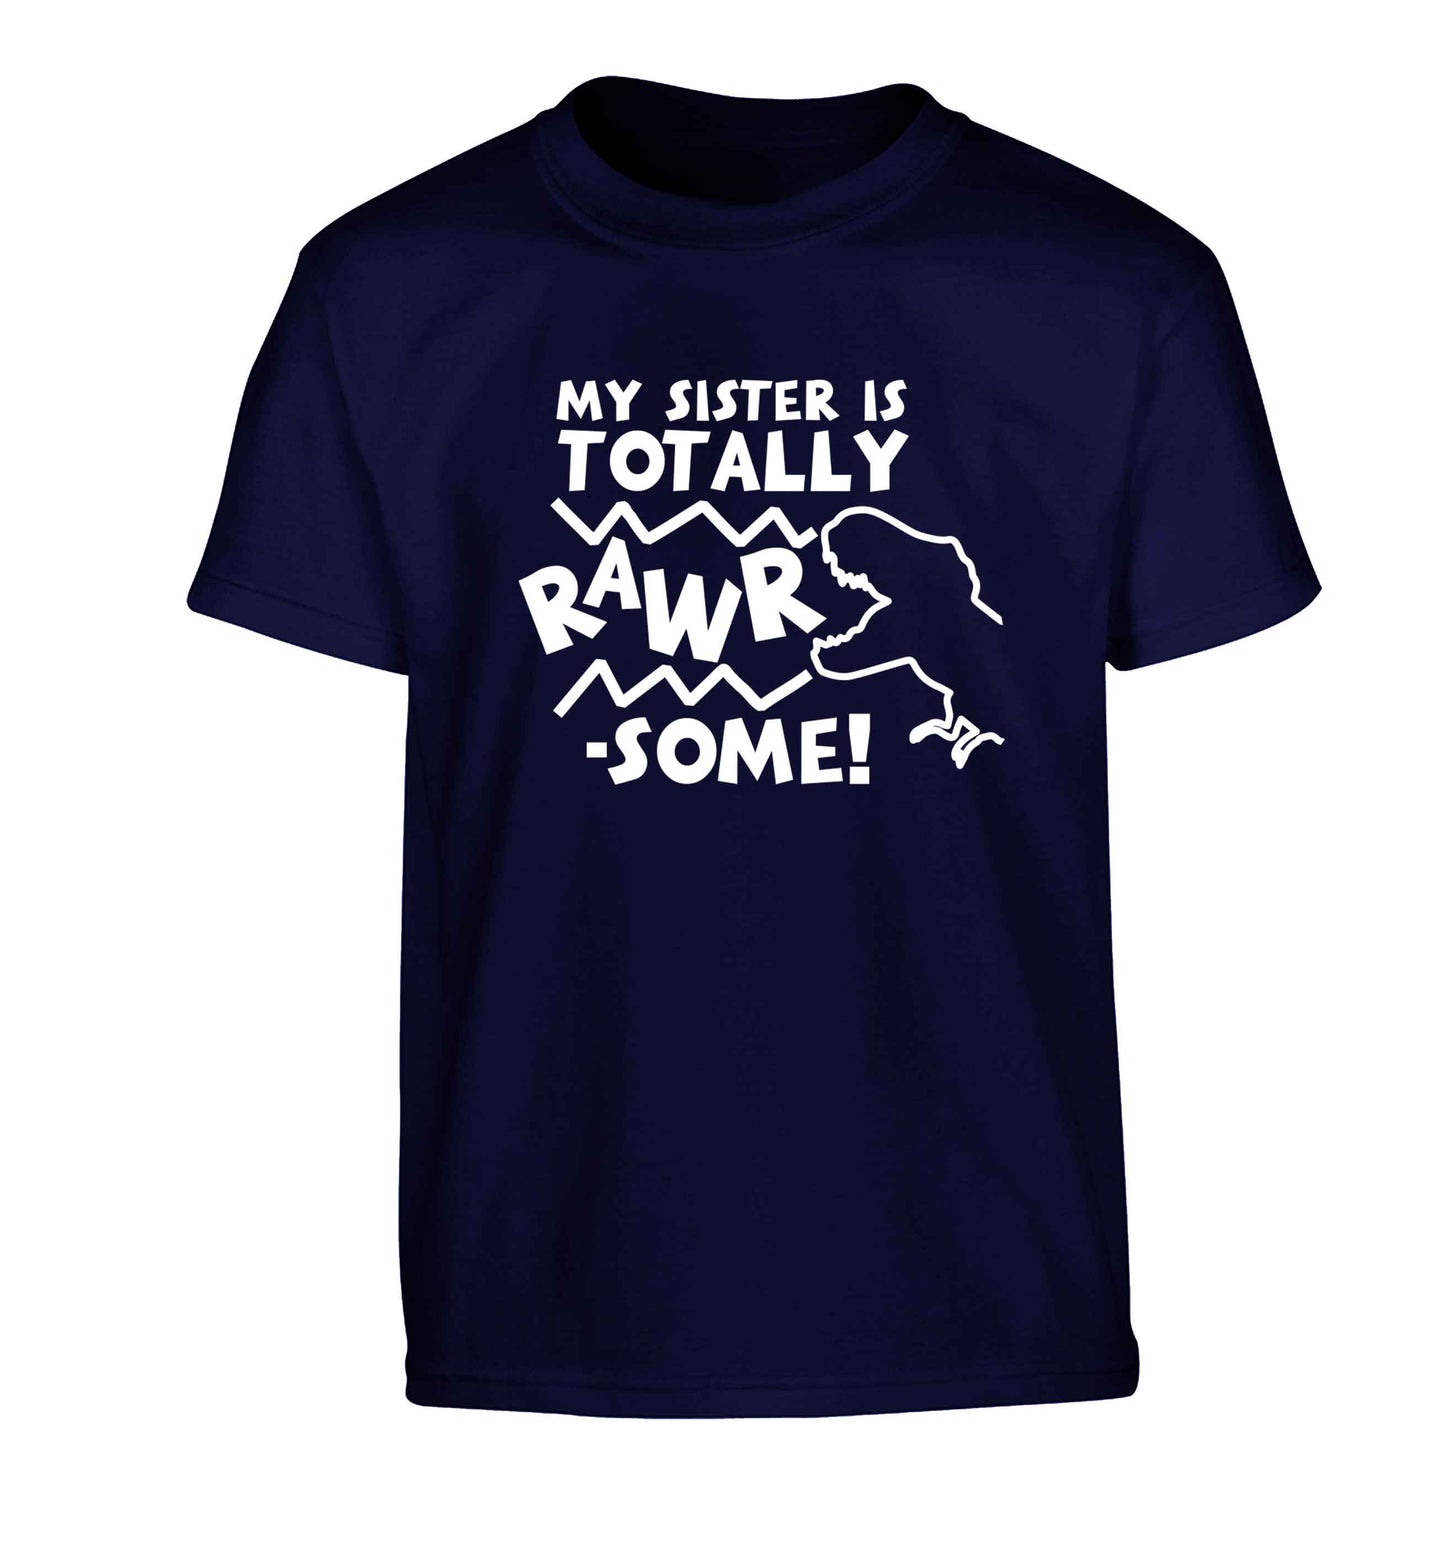 My sister is totally rawrsome Children's navy Tshirt 12-13 Years